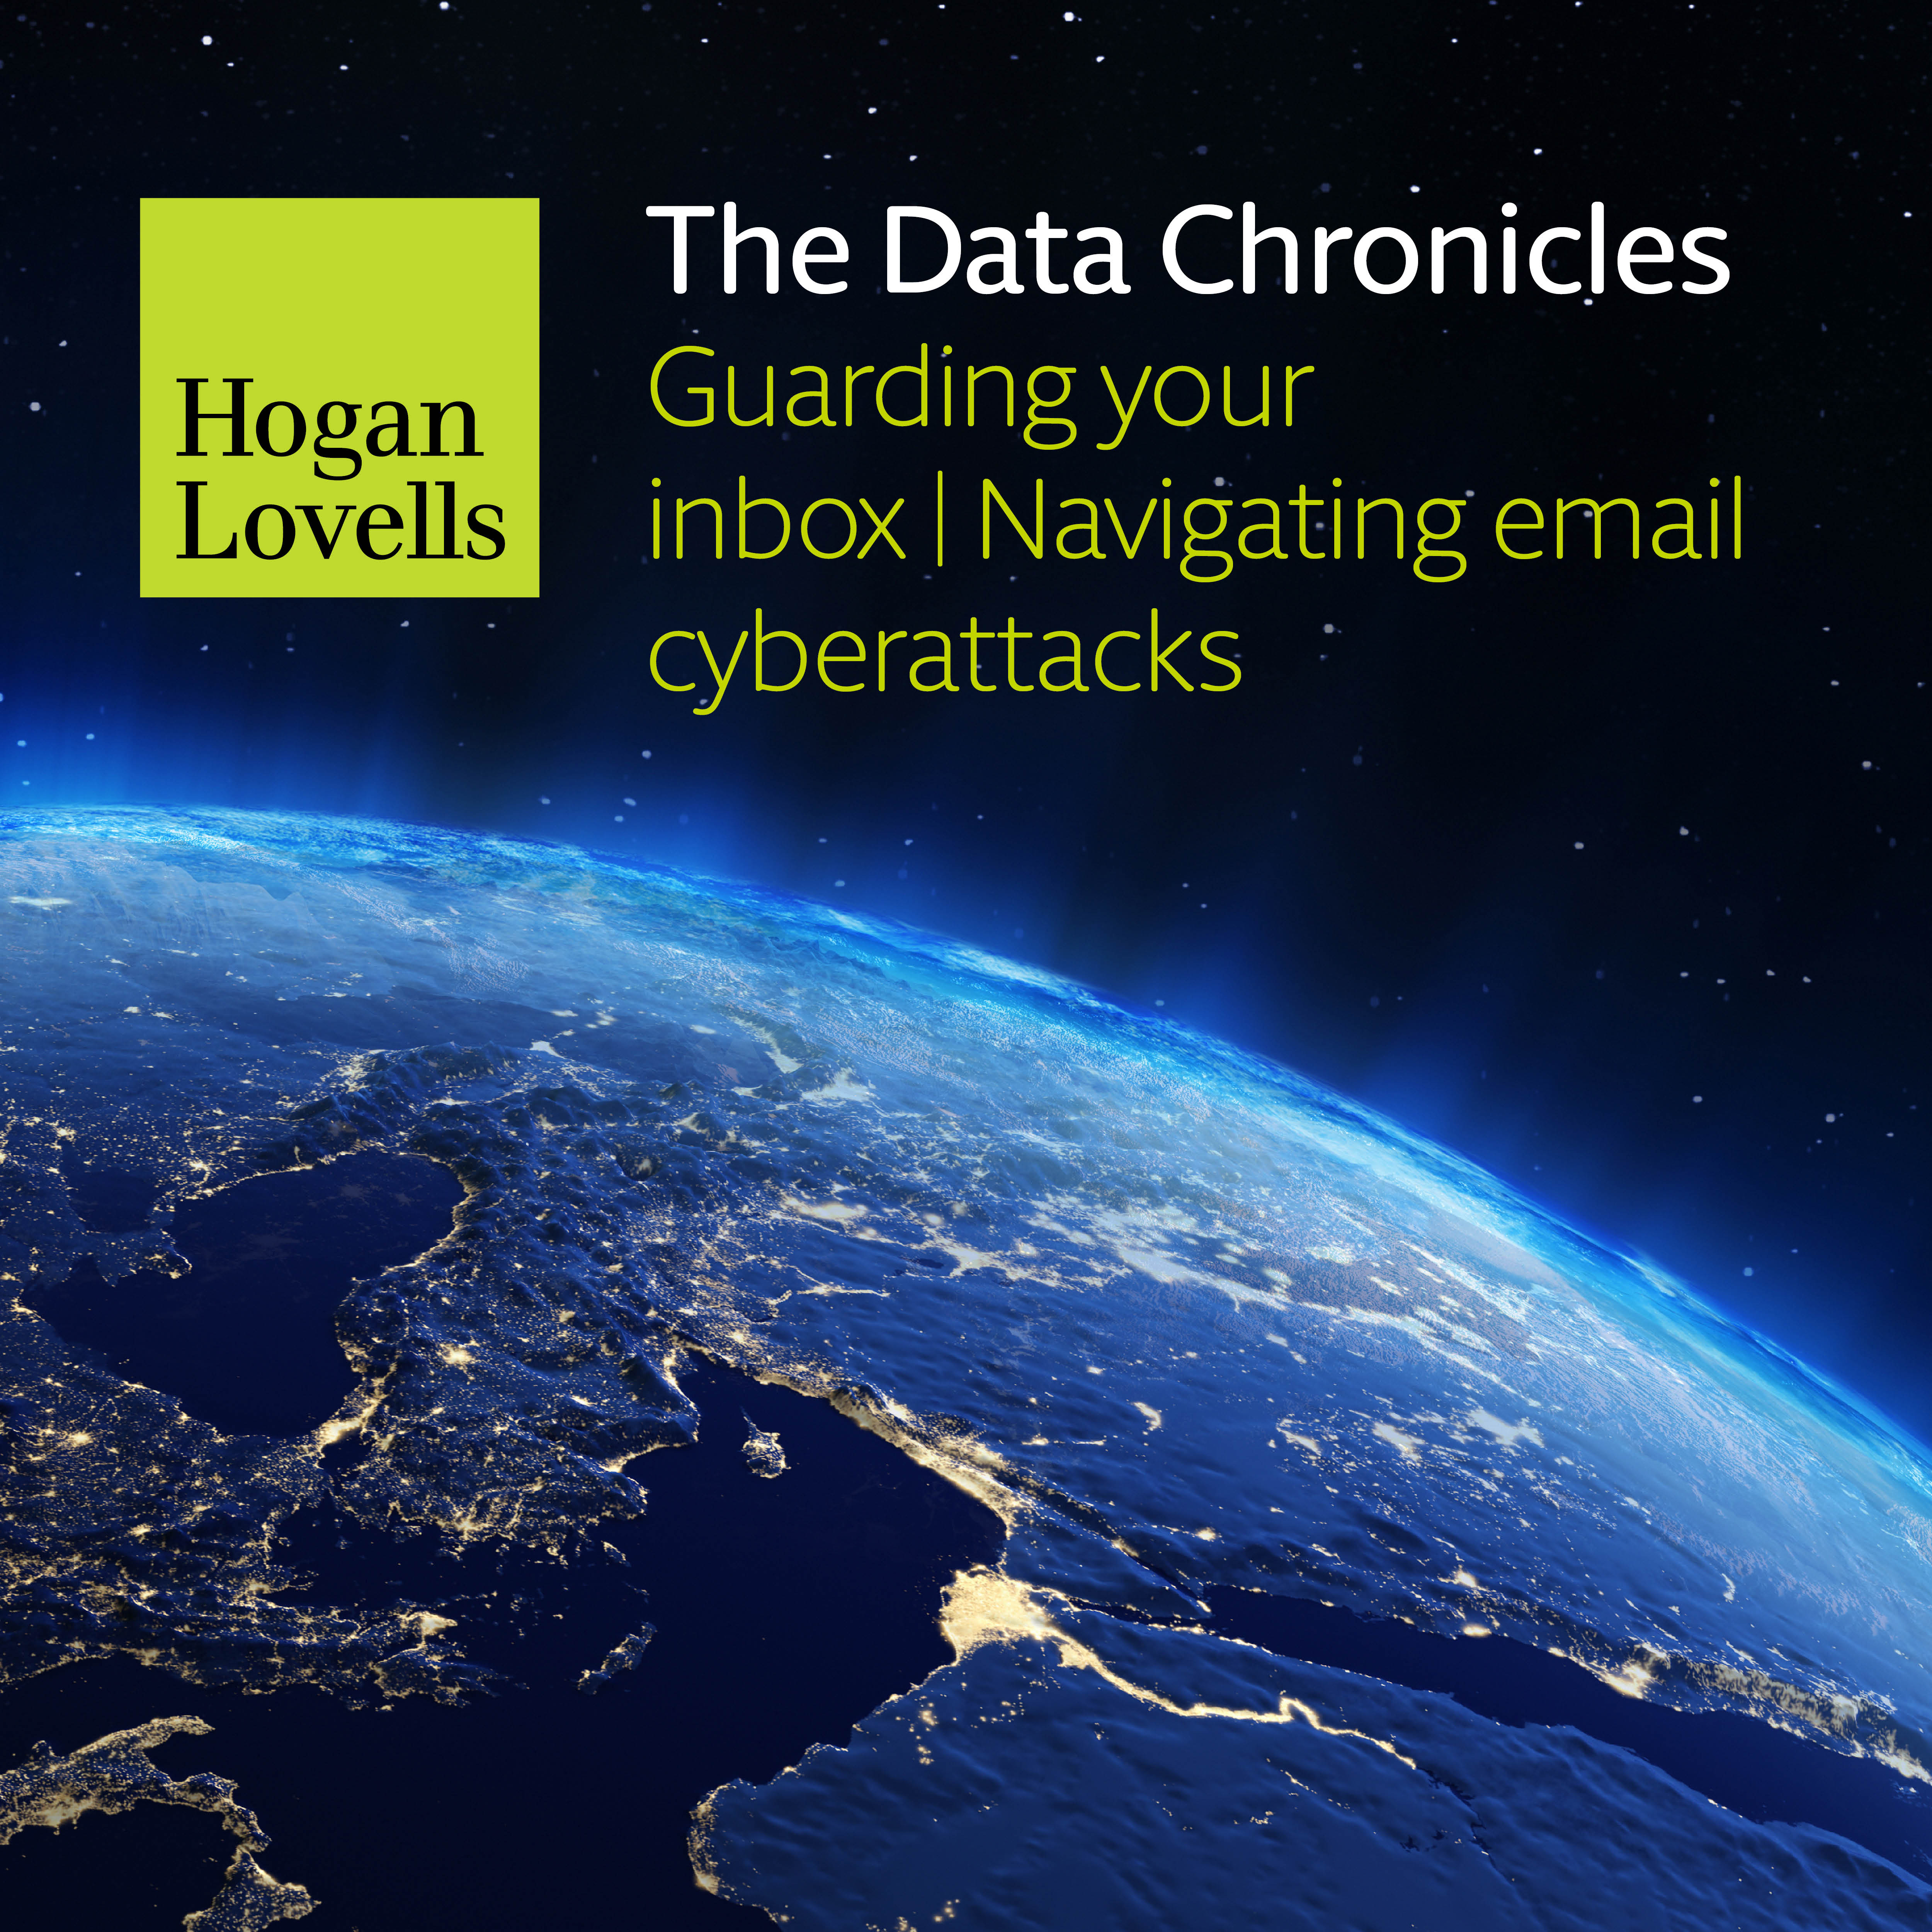 The Data Chronicles_email cyberattacks